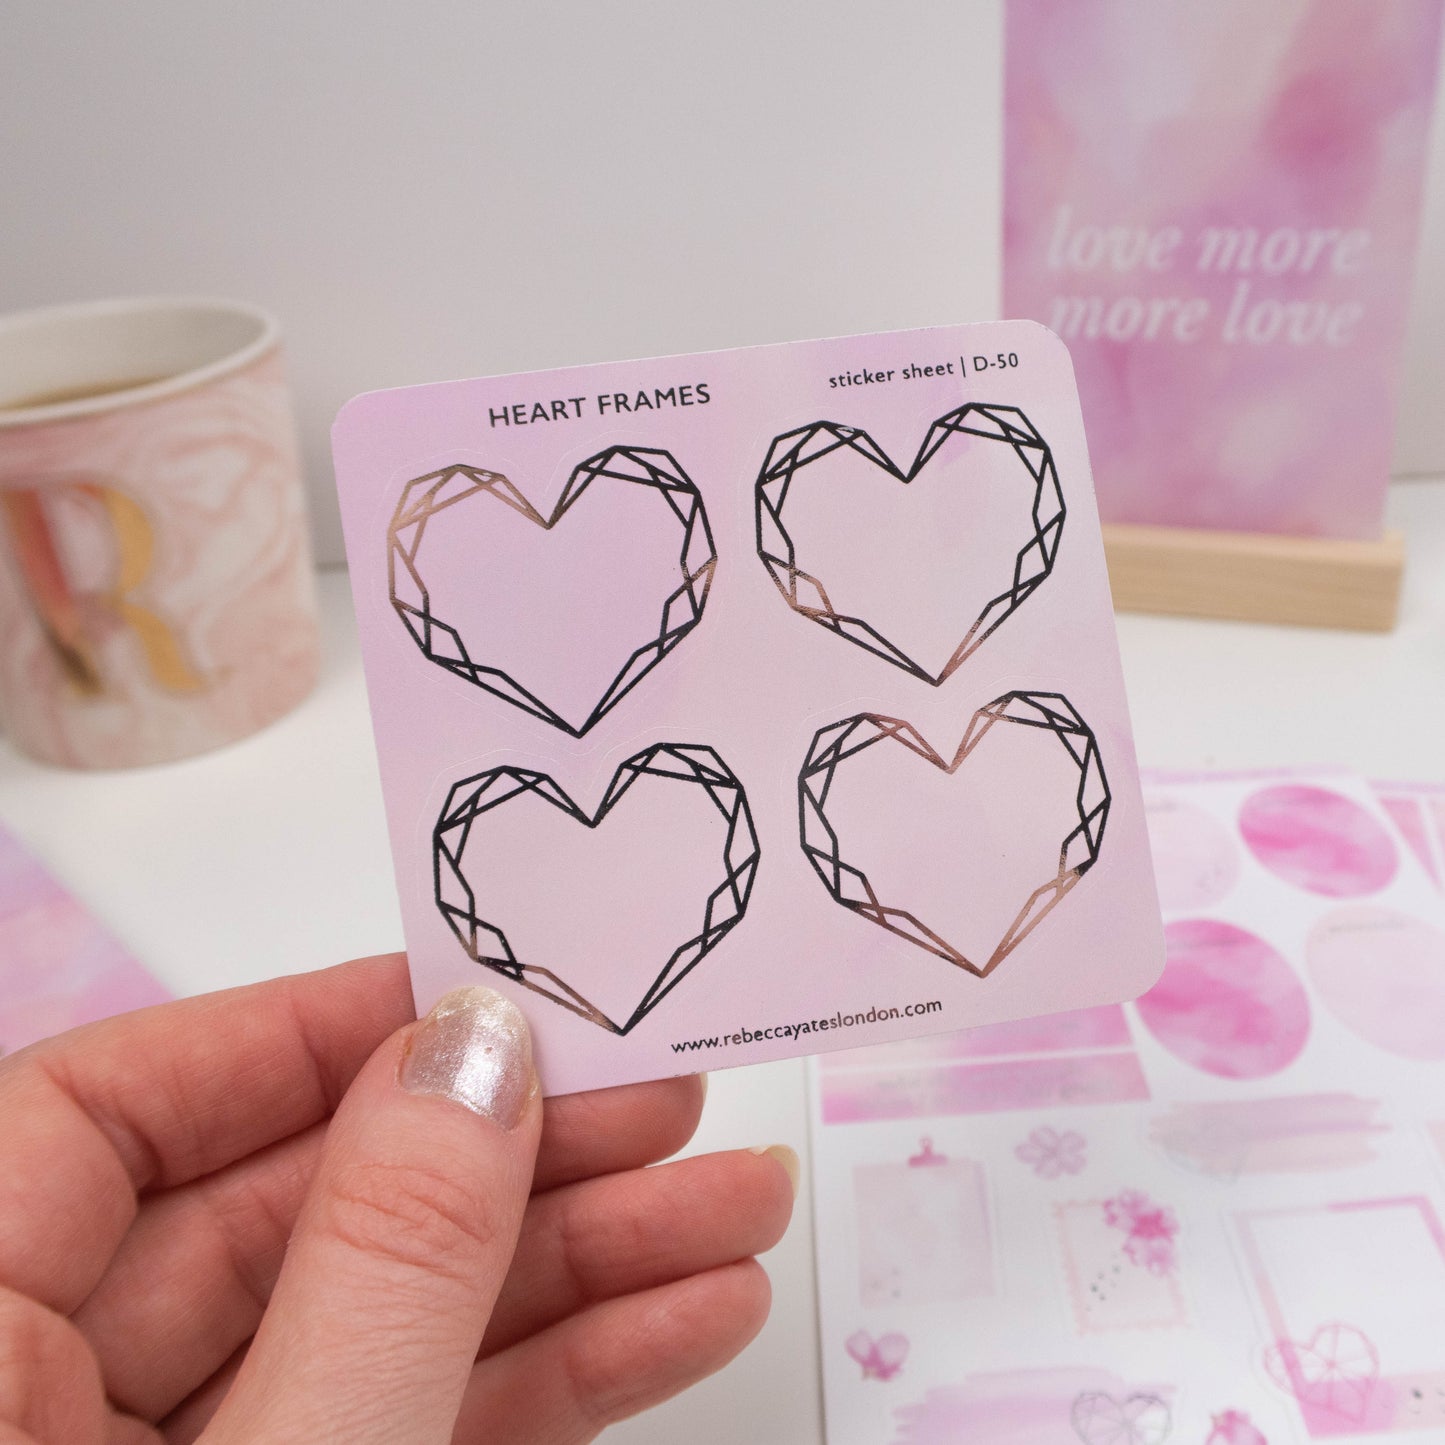 HEART FRAMES - FOILED PLANNER STICKERS